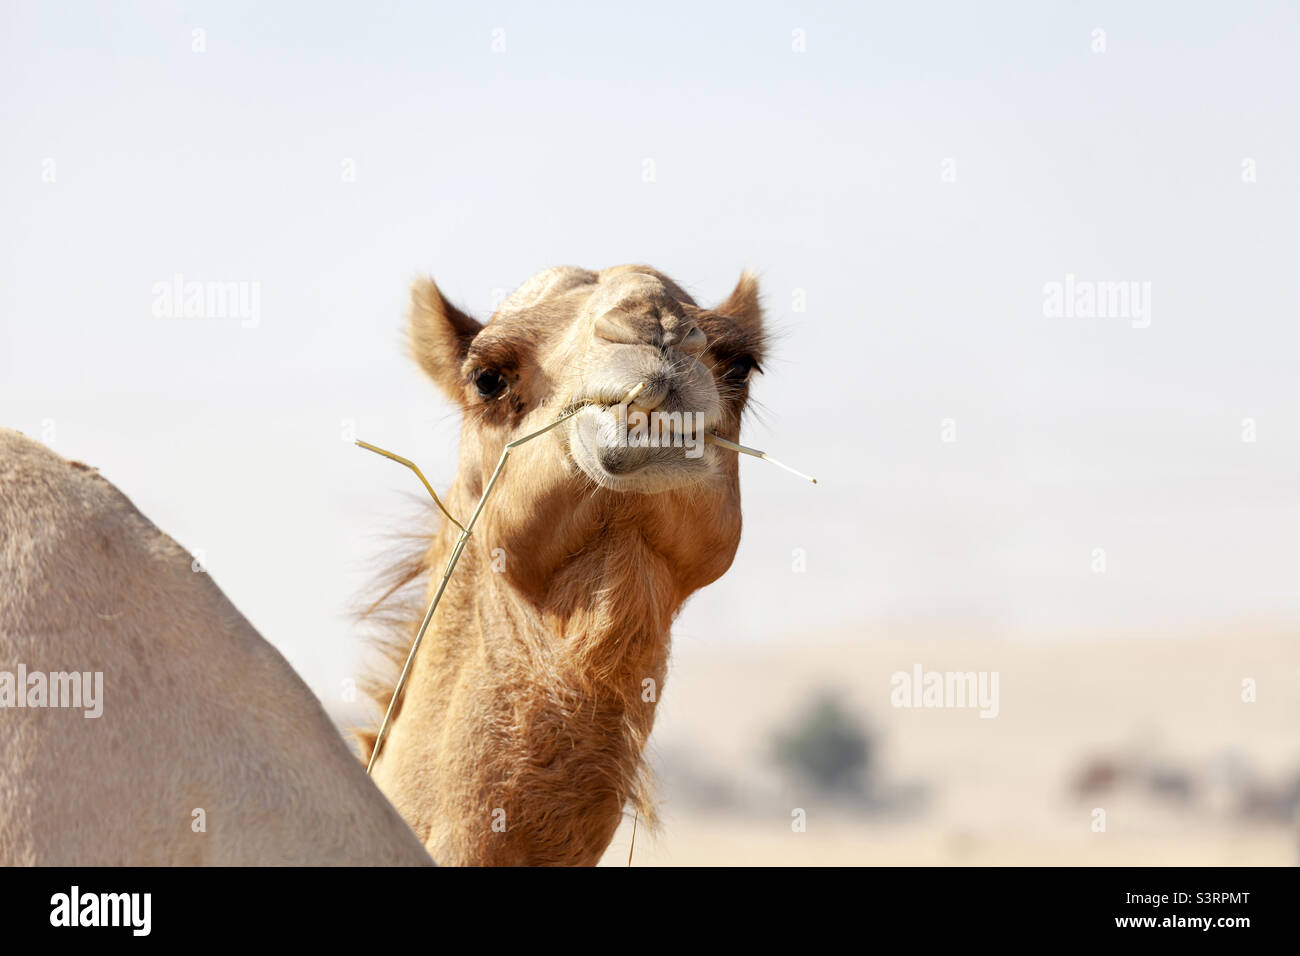 Cute Middle Eastern camel chewing plant in the desert Stock Photo